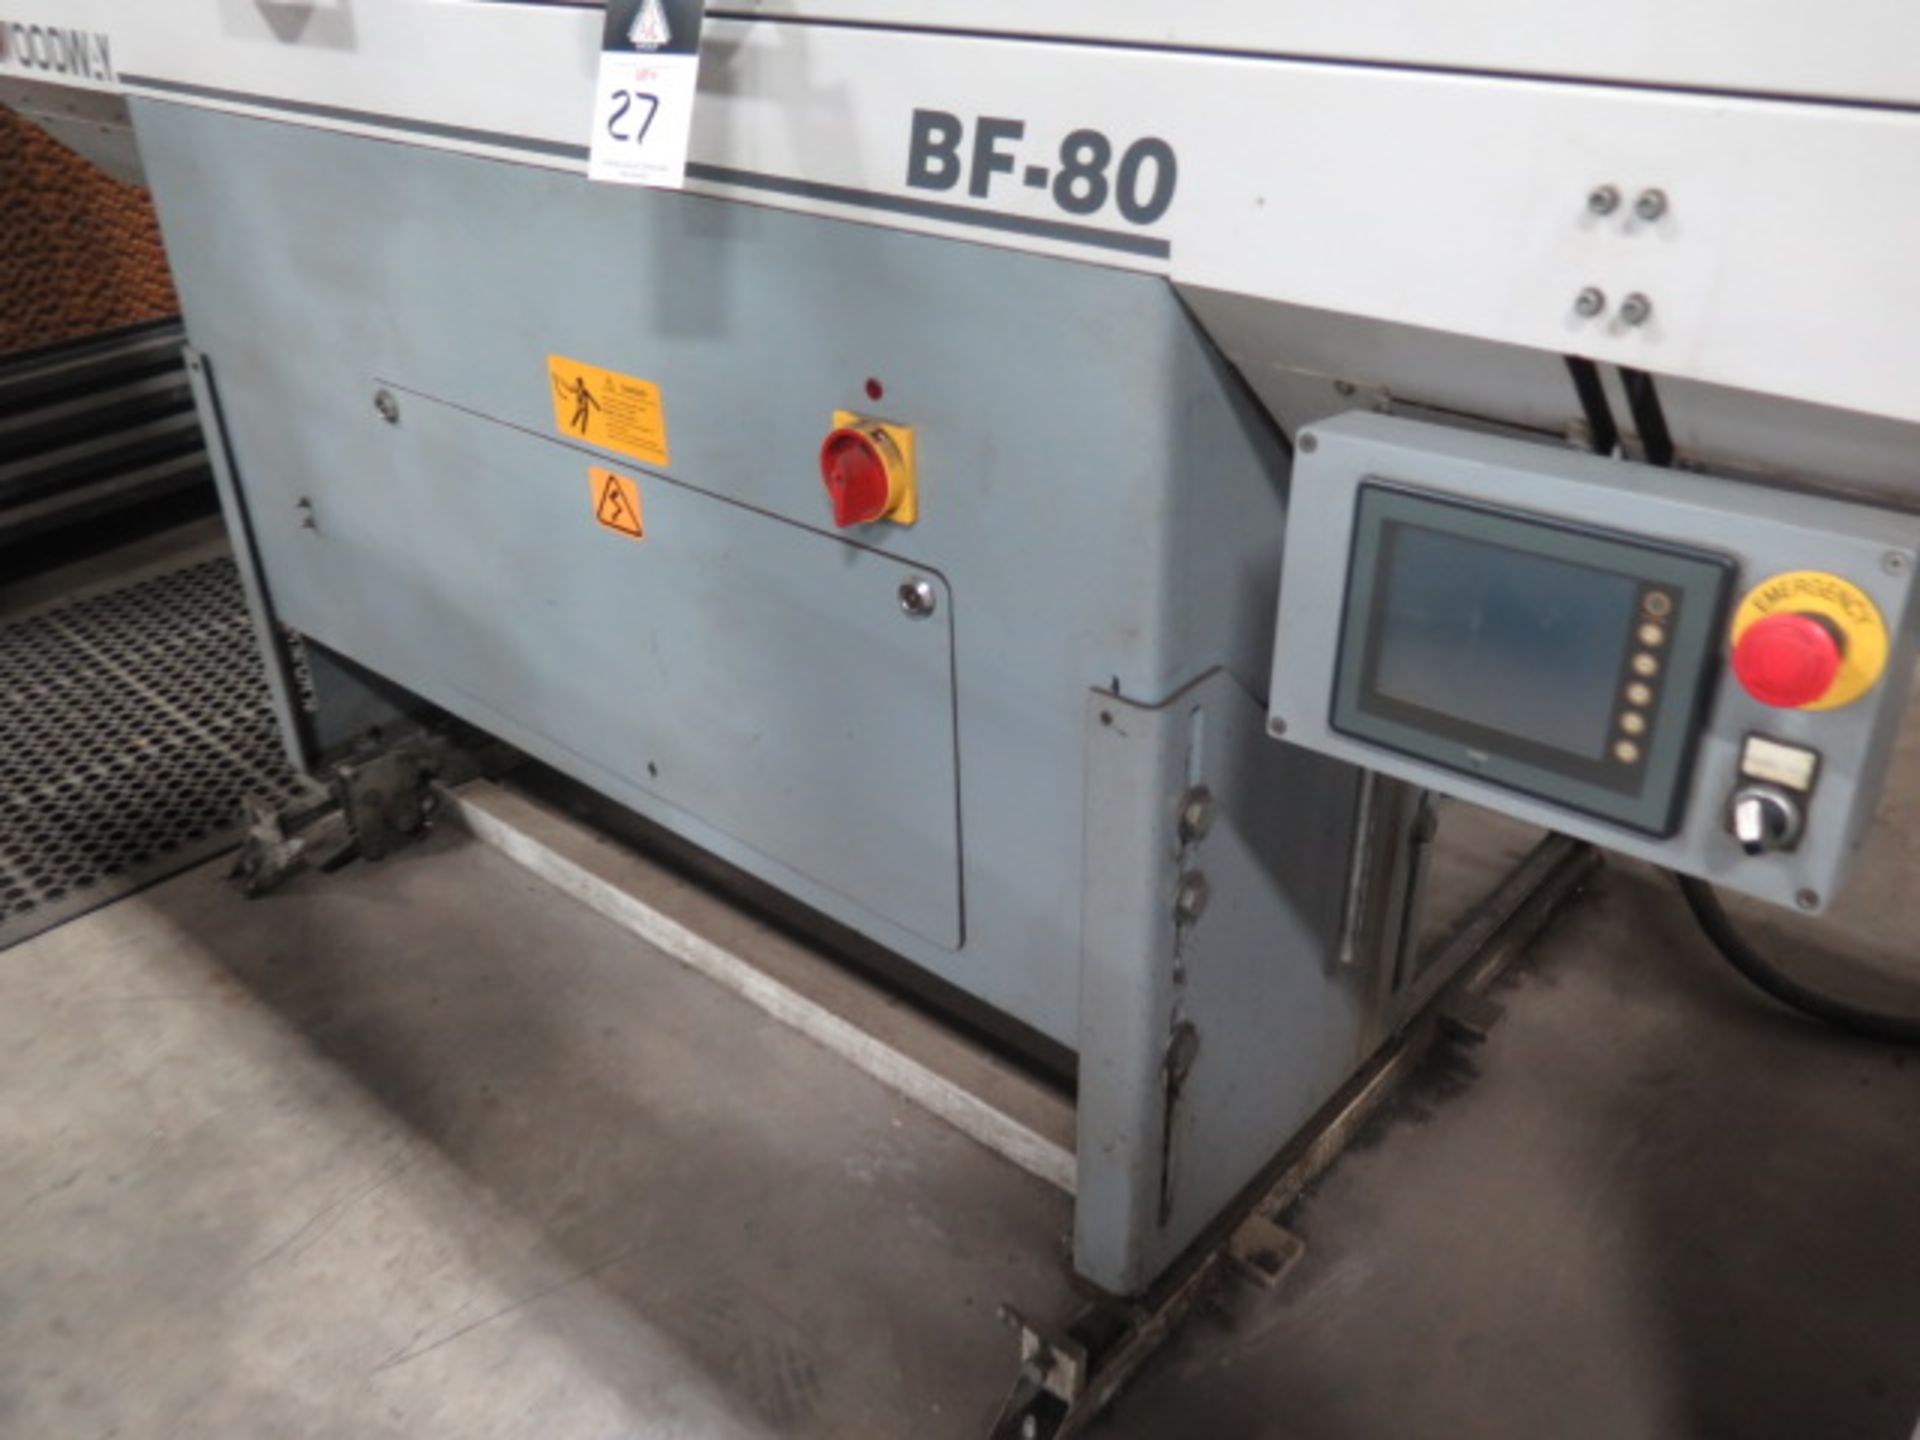 Goodway BF-80 Automatic Bar Loader/Feeder w/ PLC Controls (SOLD AS-IS - NO WARRANTY) - Image 3 of 10